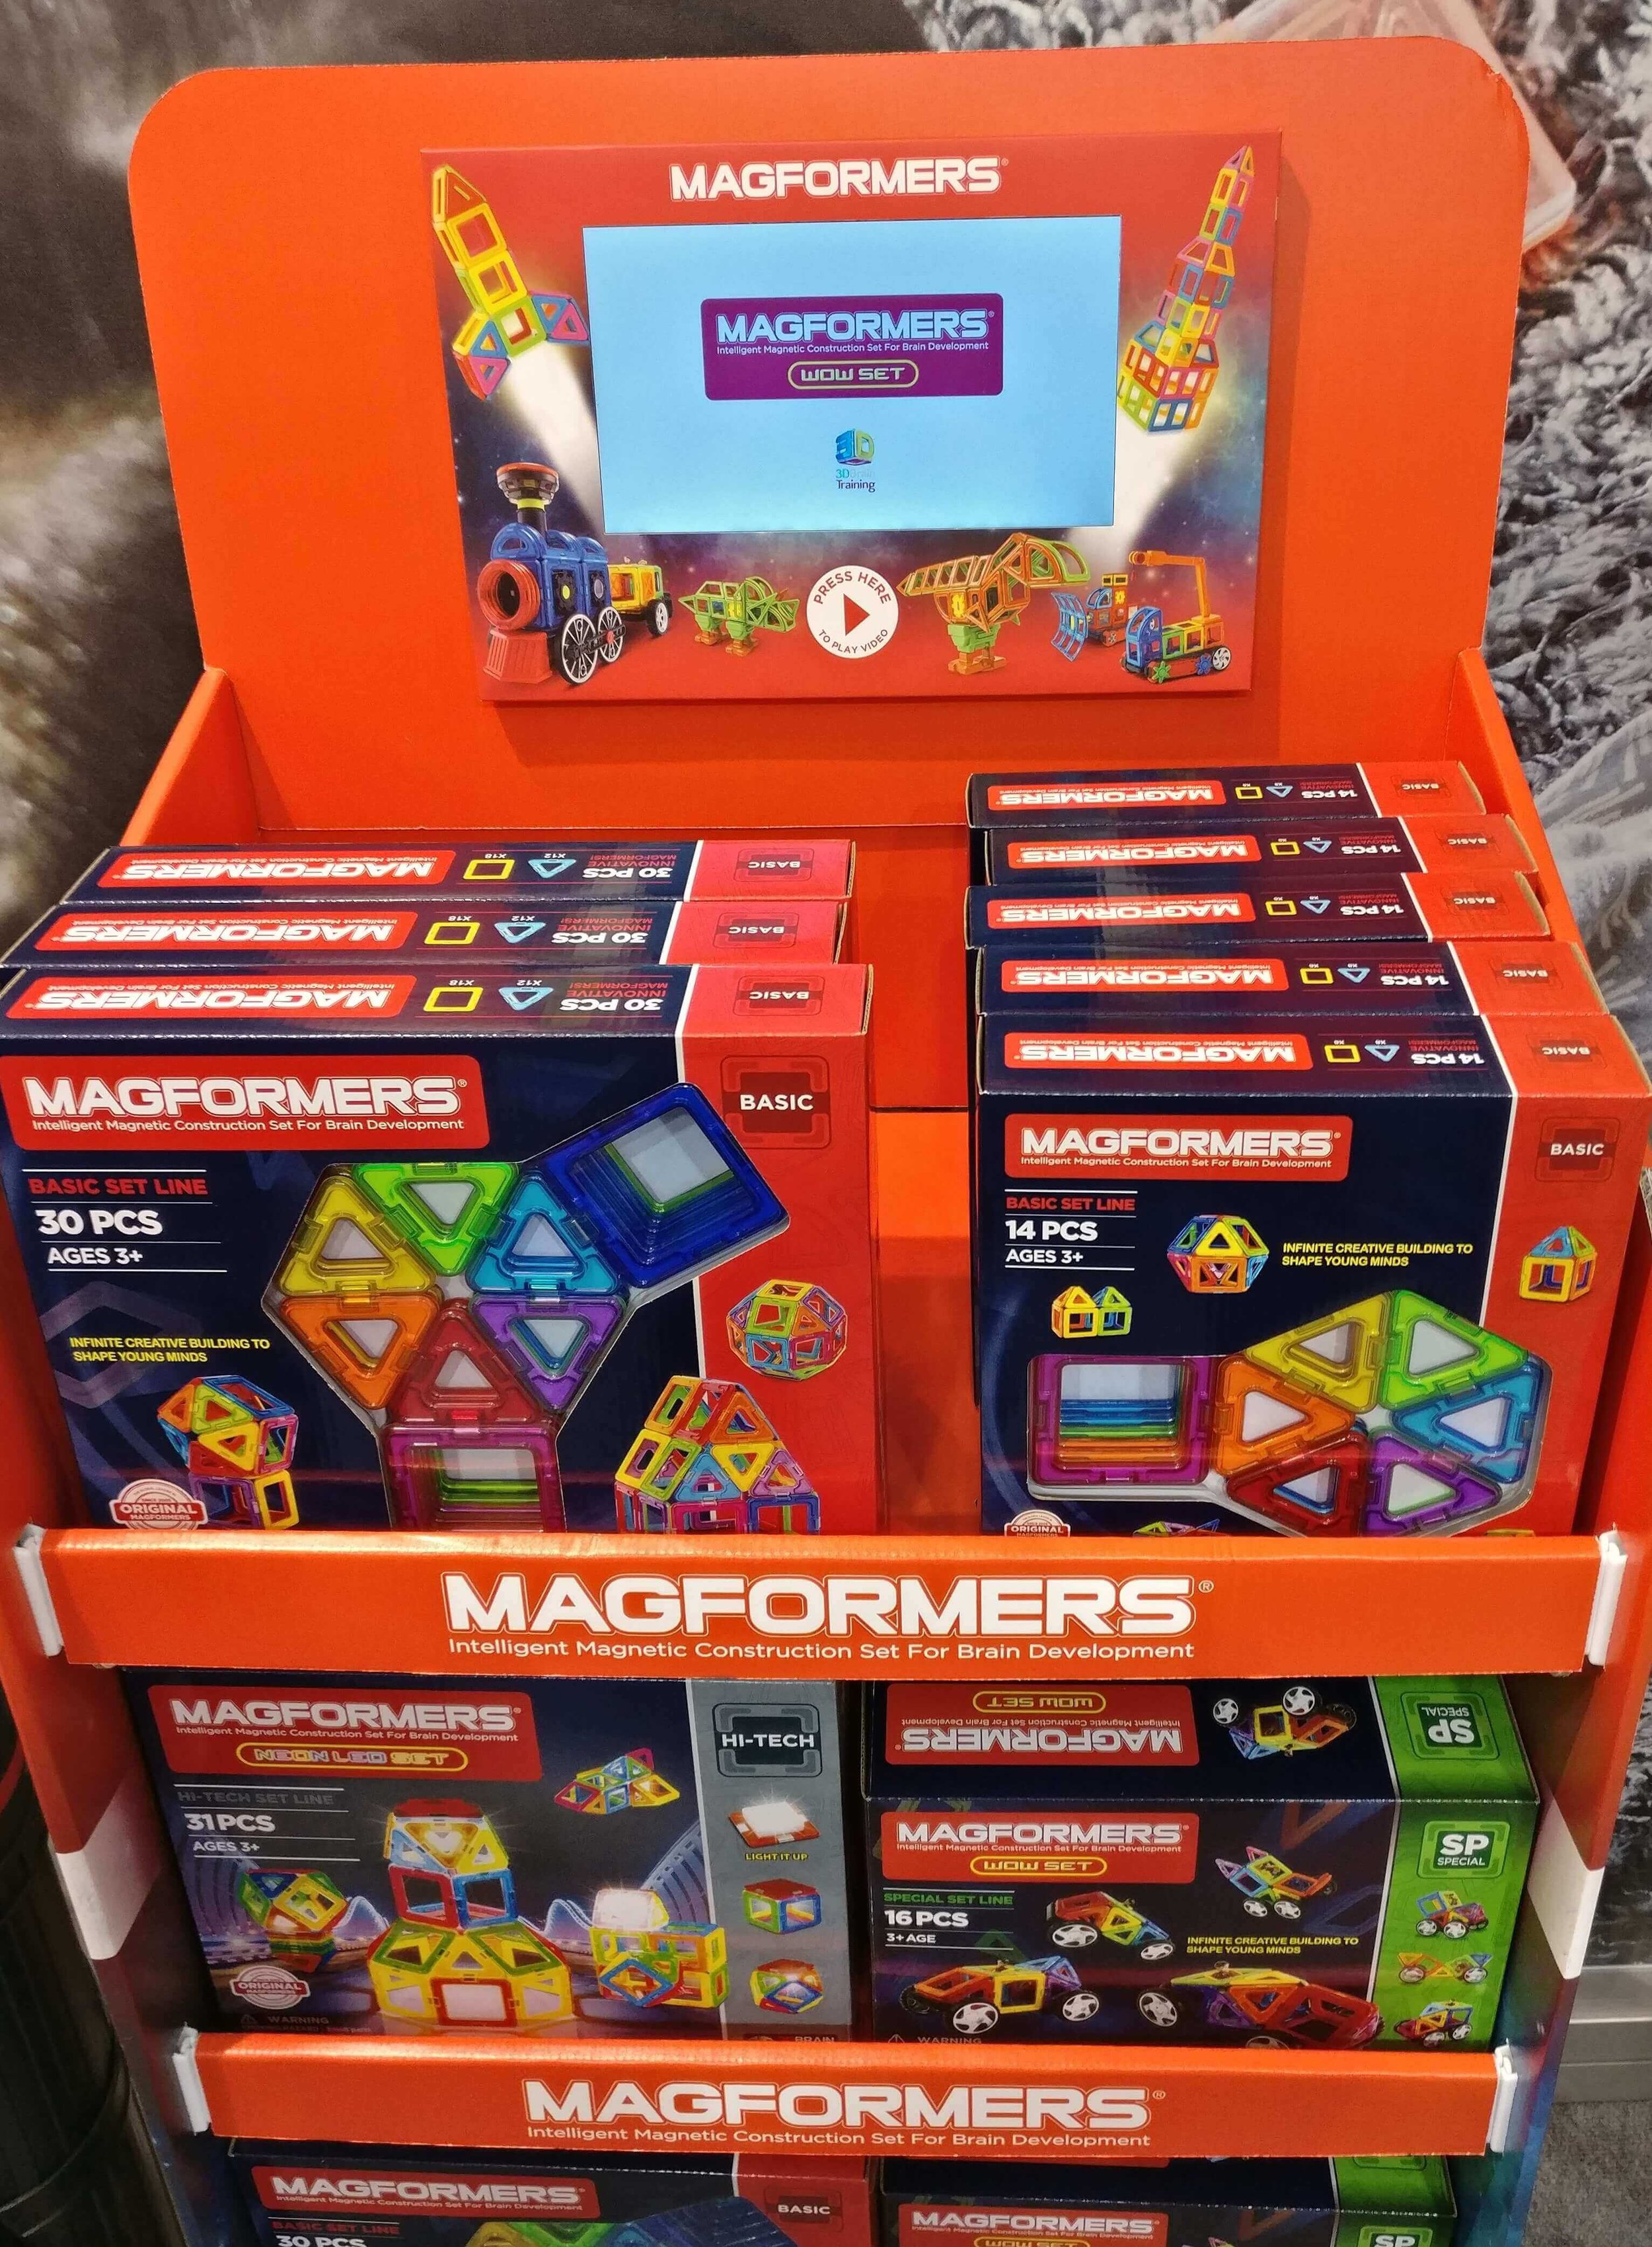 Digital Video Cards for magformers